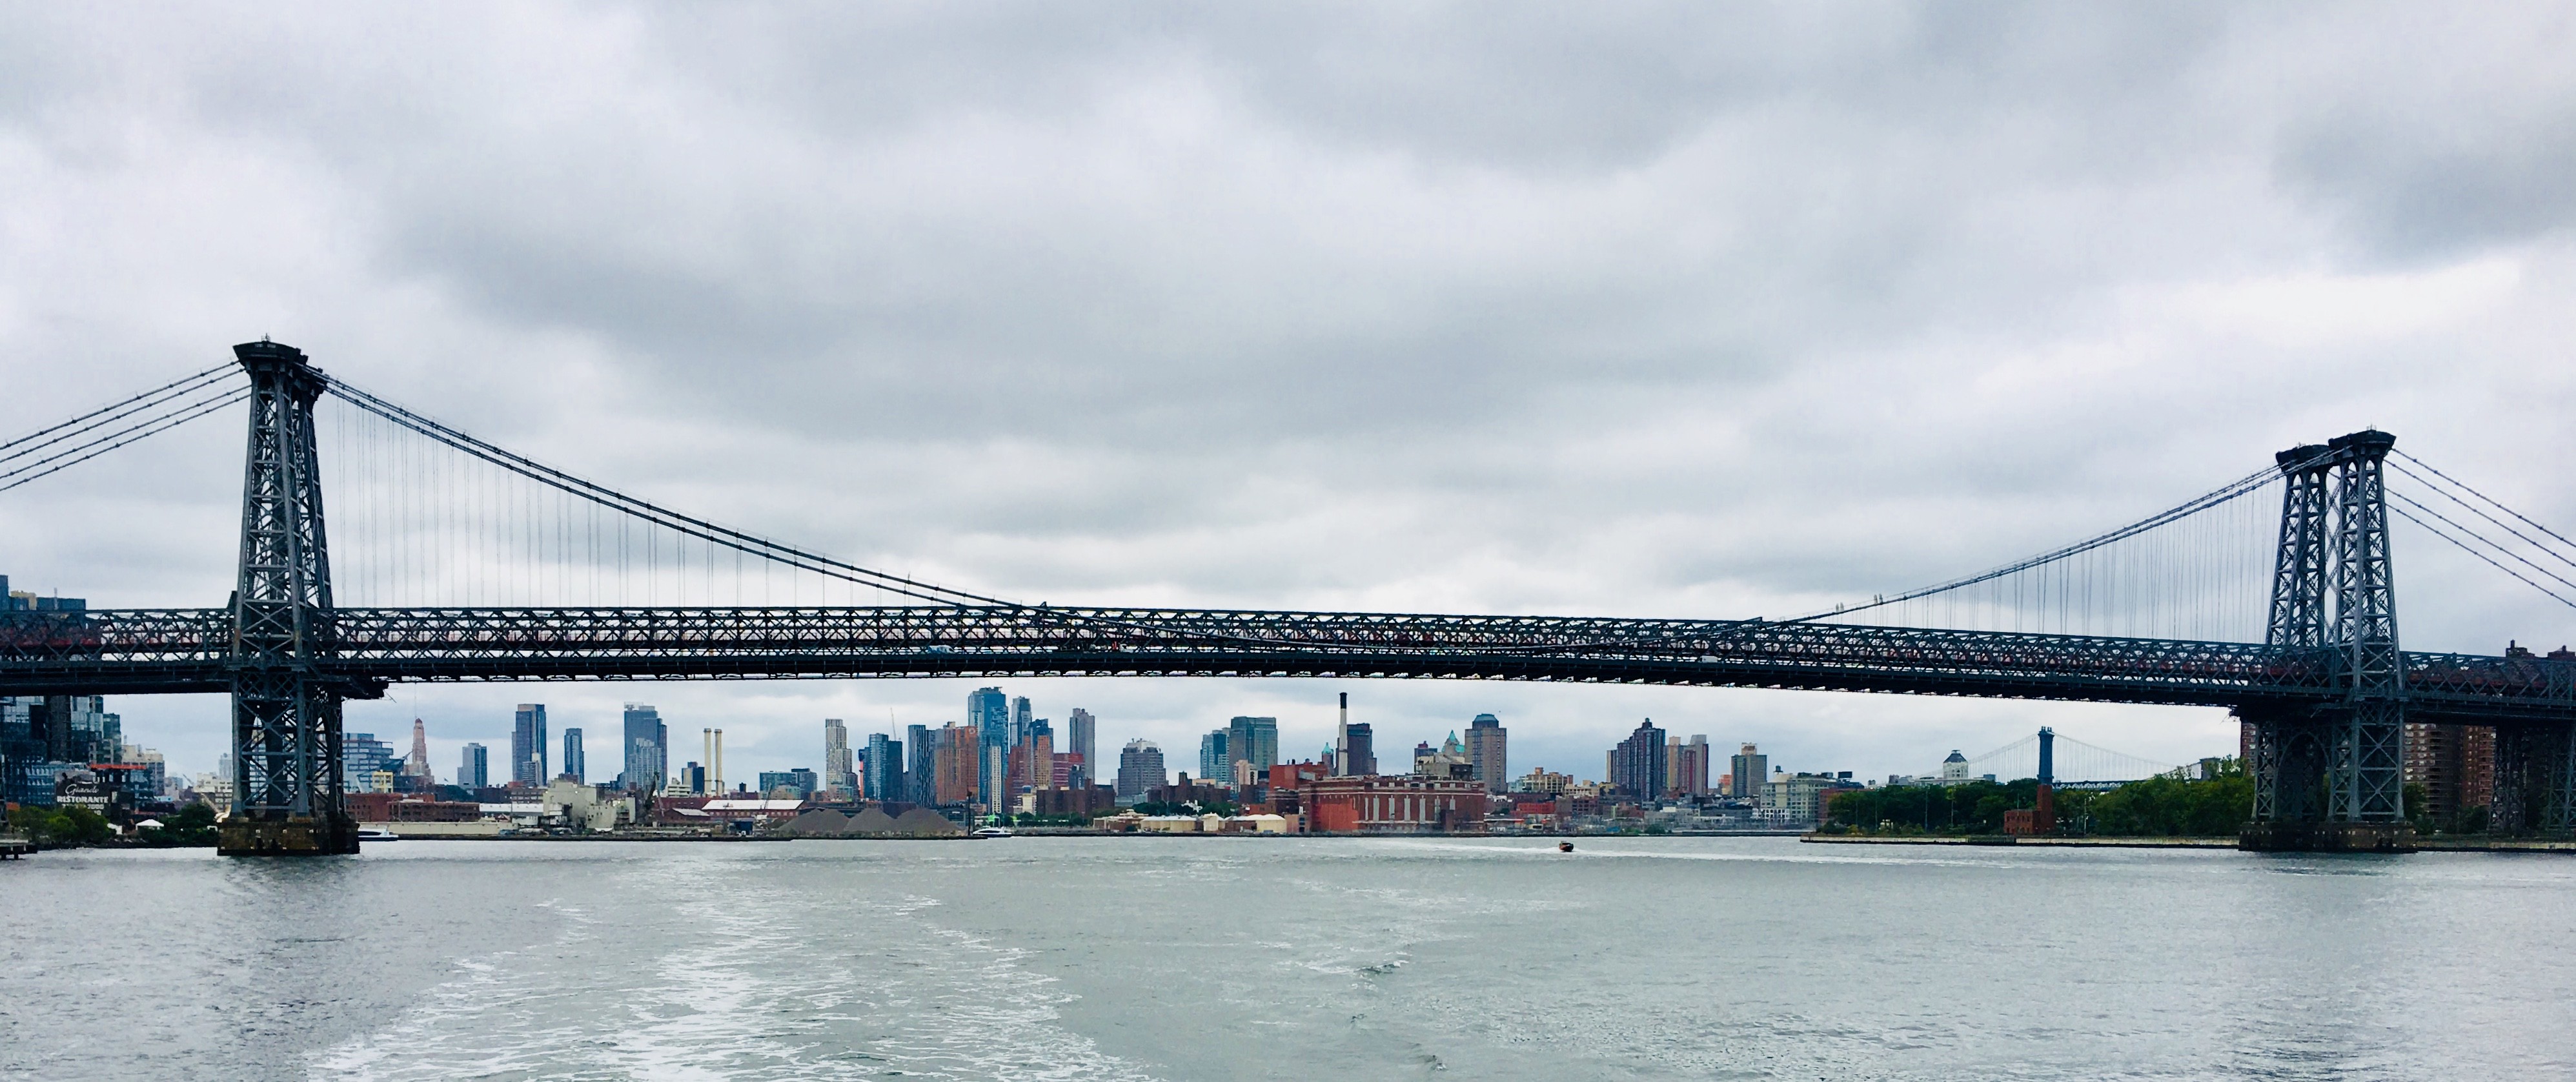 The Williamsburg Bridge looks especially iconic when you see it from a ferry in the middle of the East River.